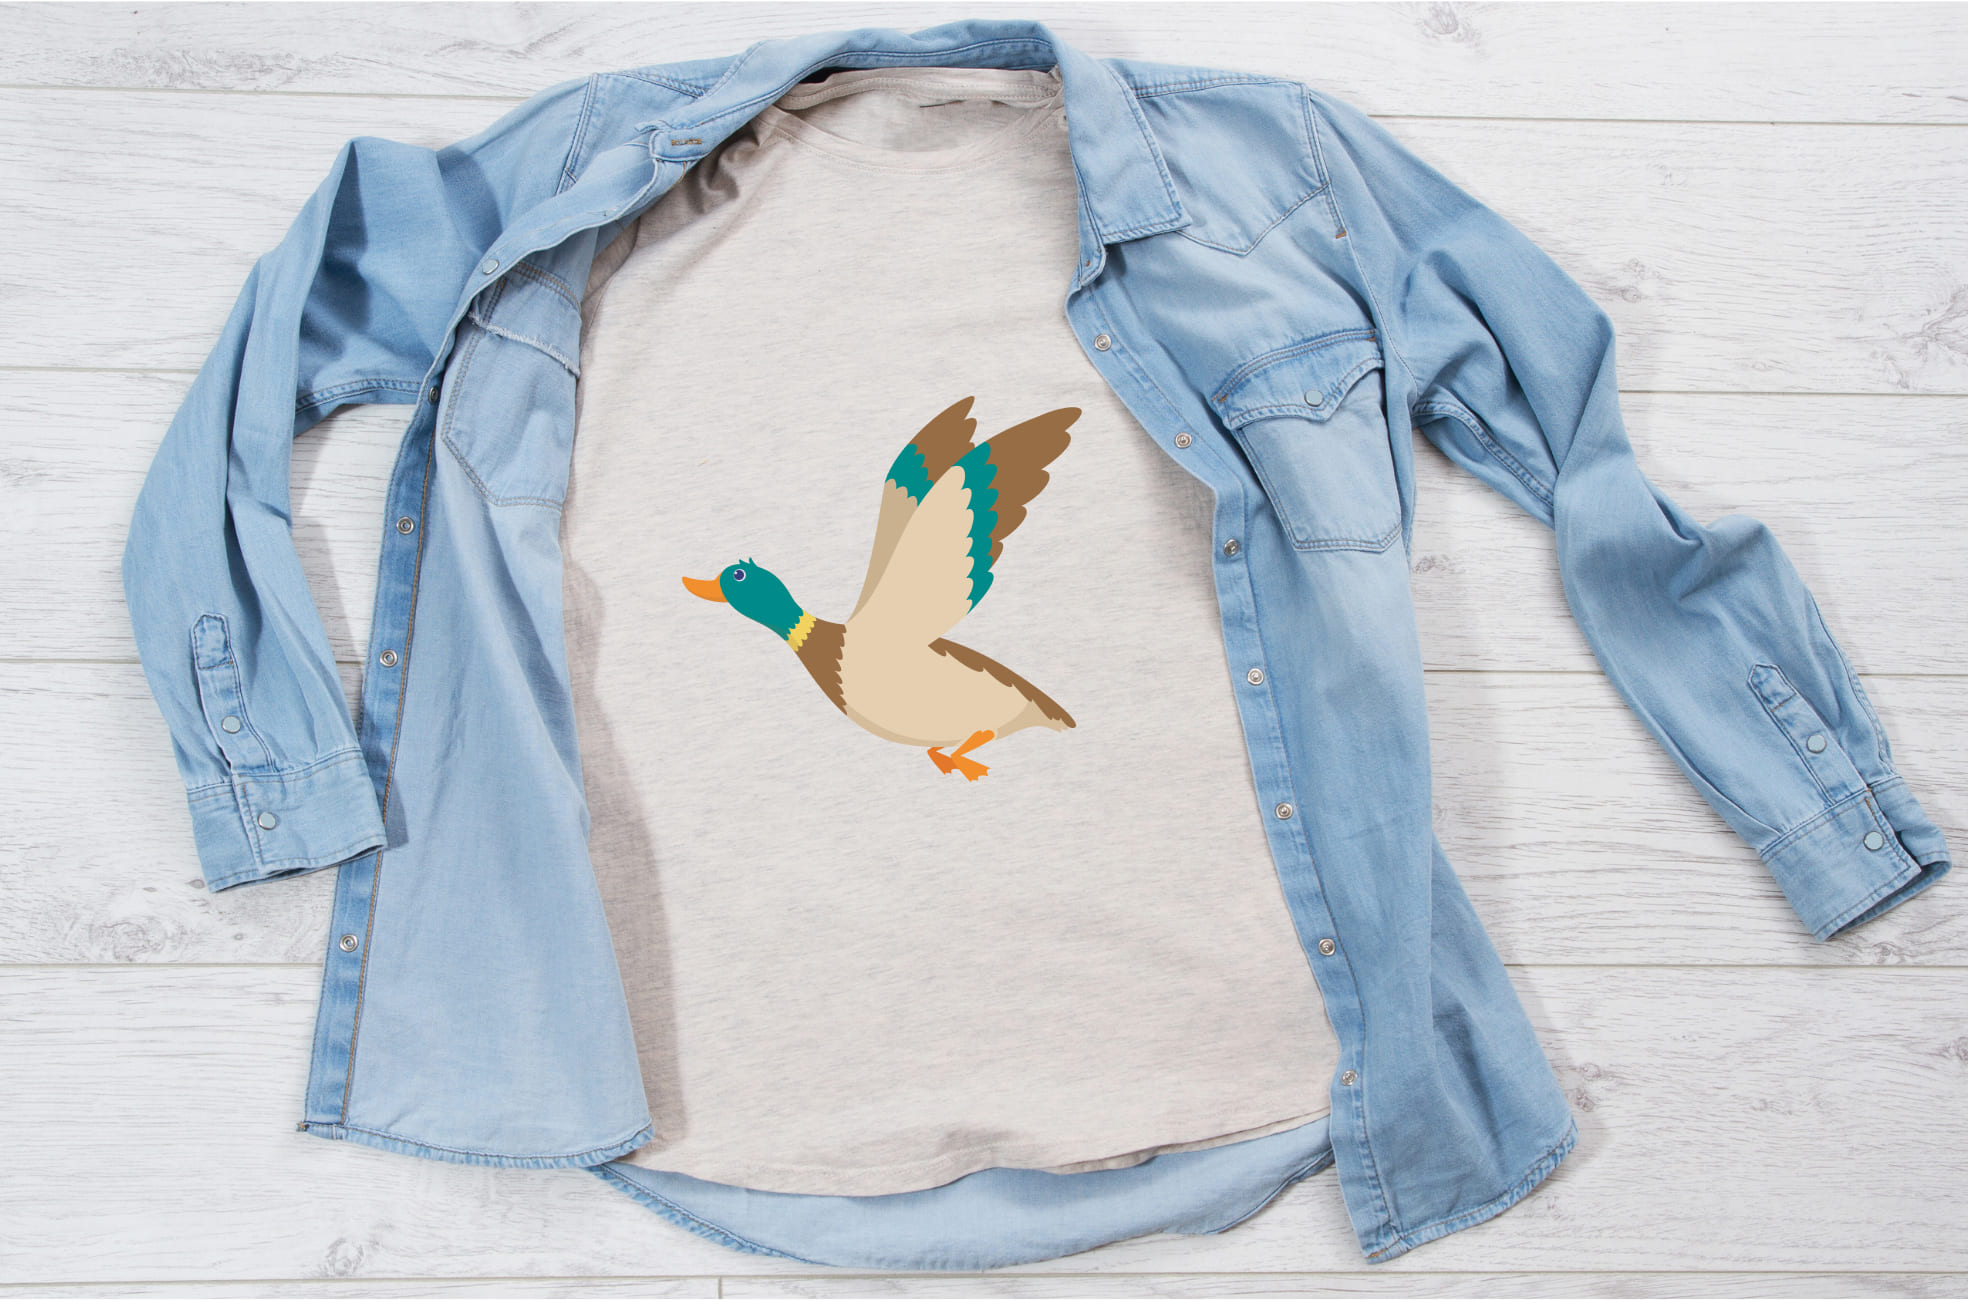 Image of a white t-shirt with an irresistible flying duck print.